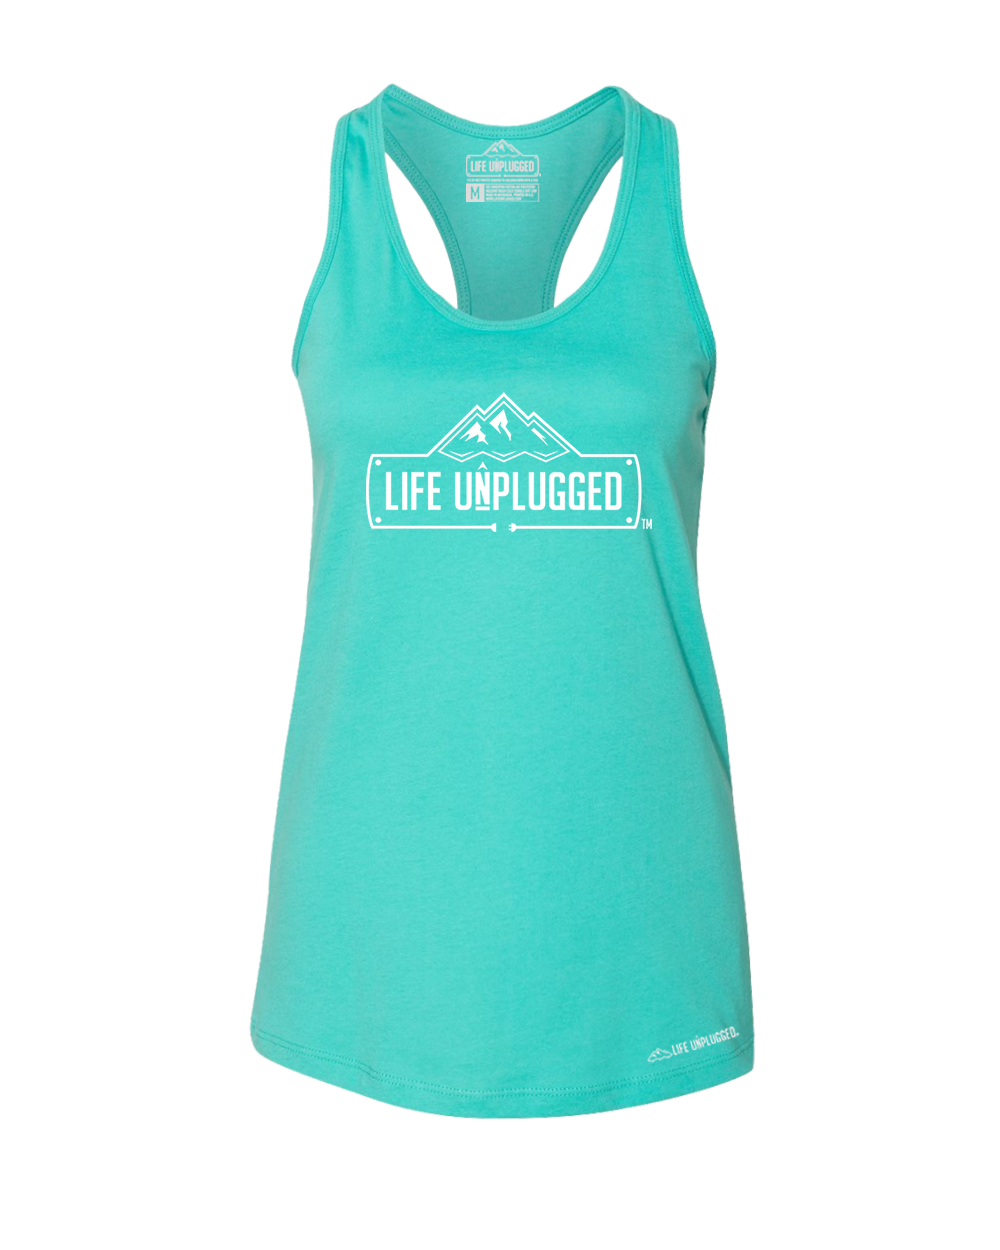 Life Unplugged Logo Premium Women's Relaxed Fit Racerback Tank Top